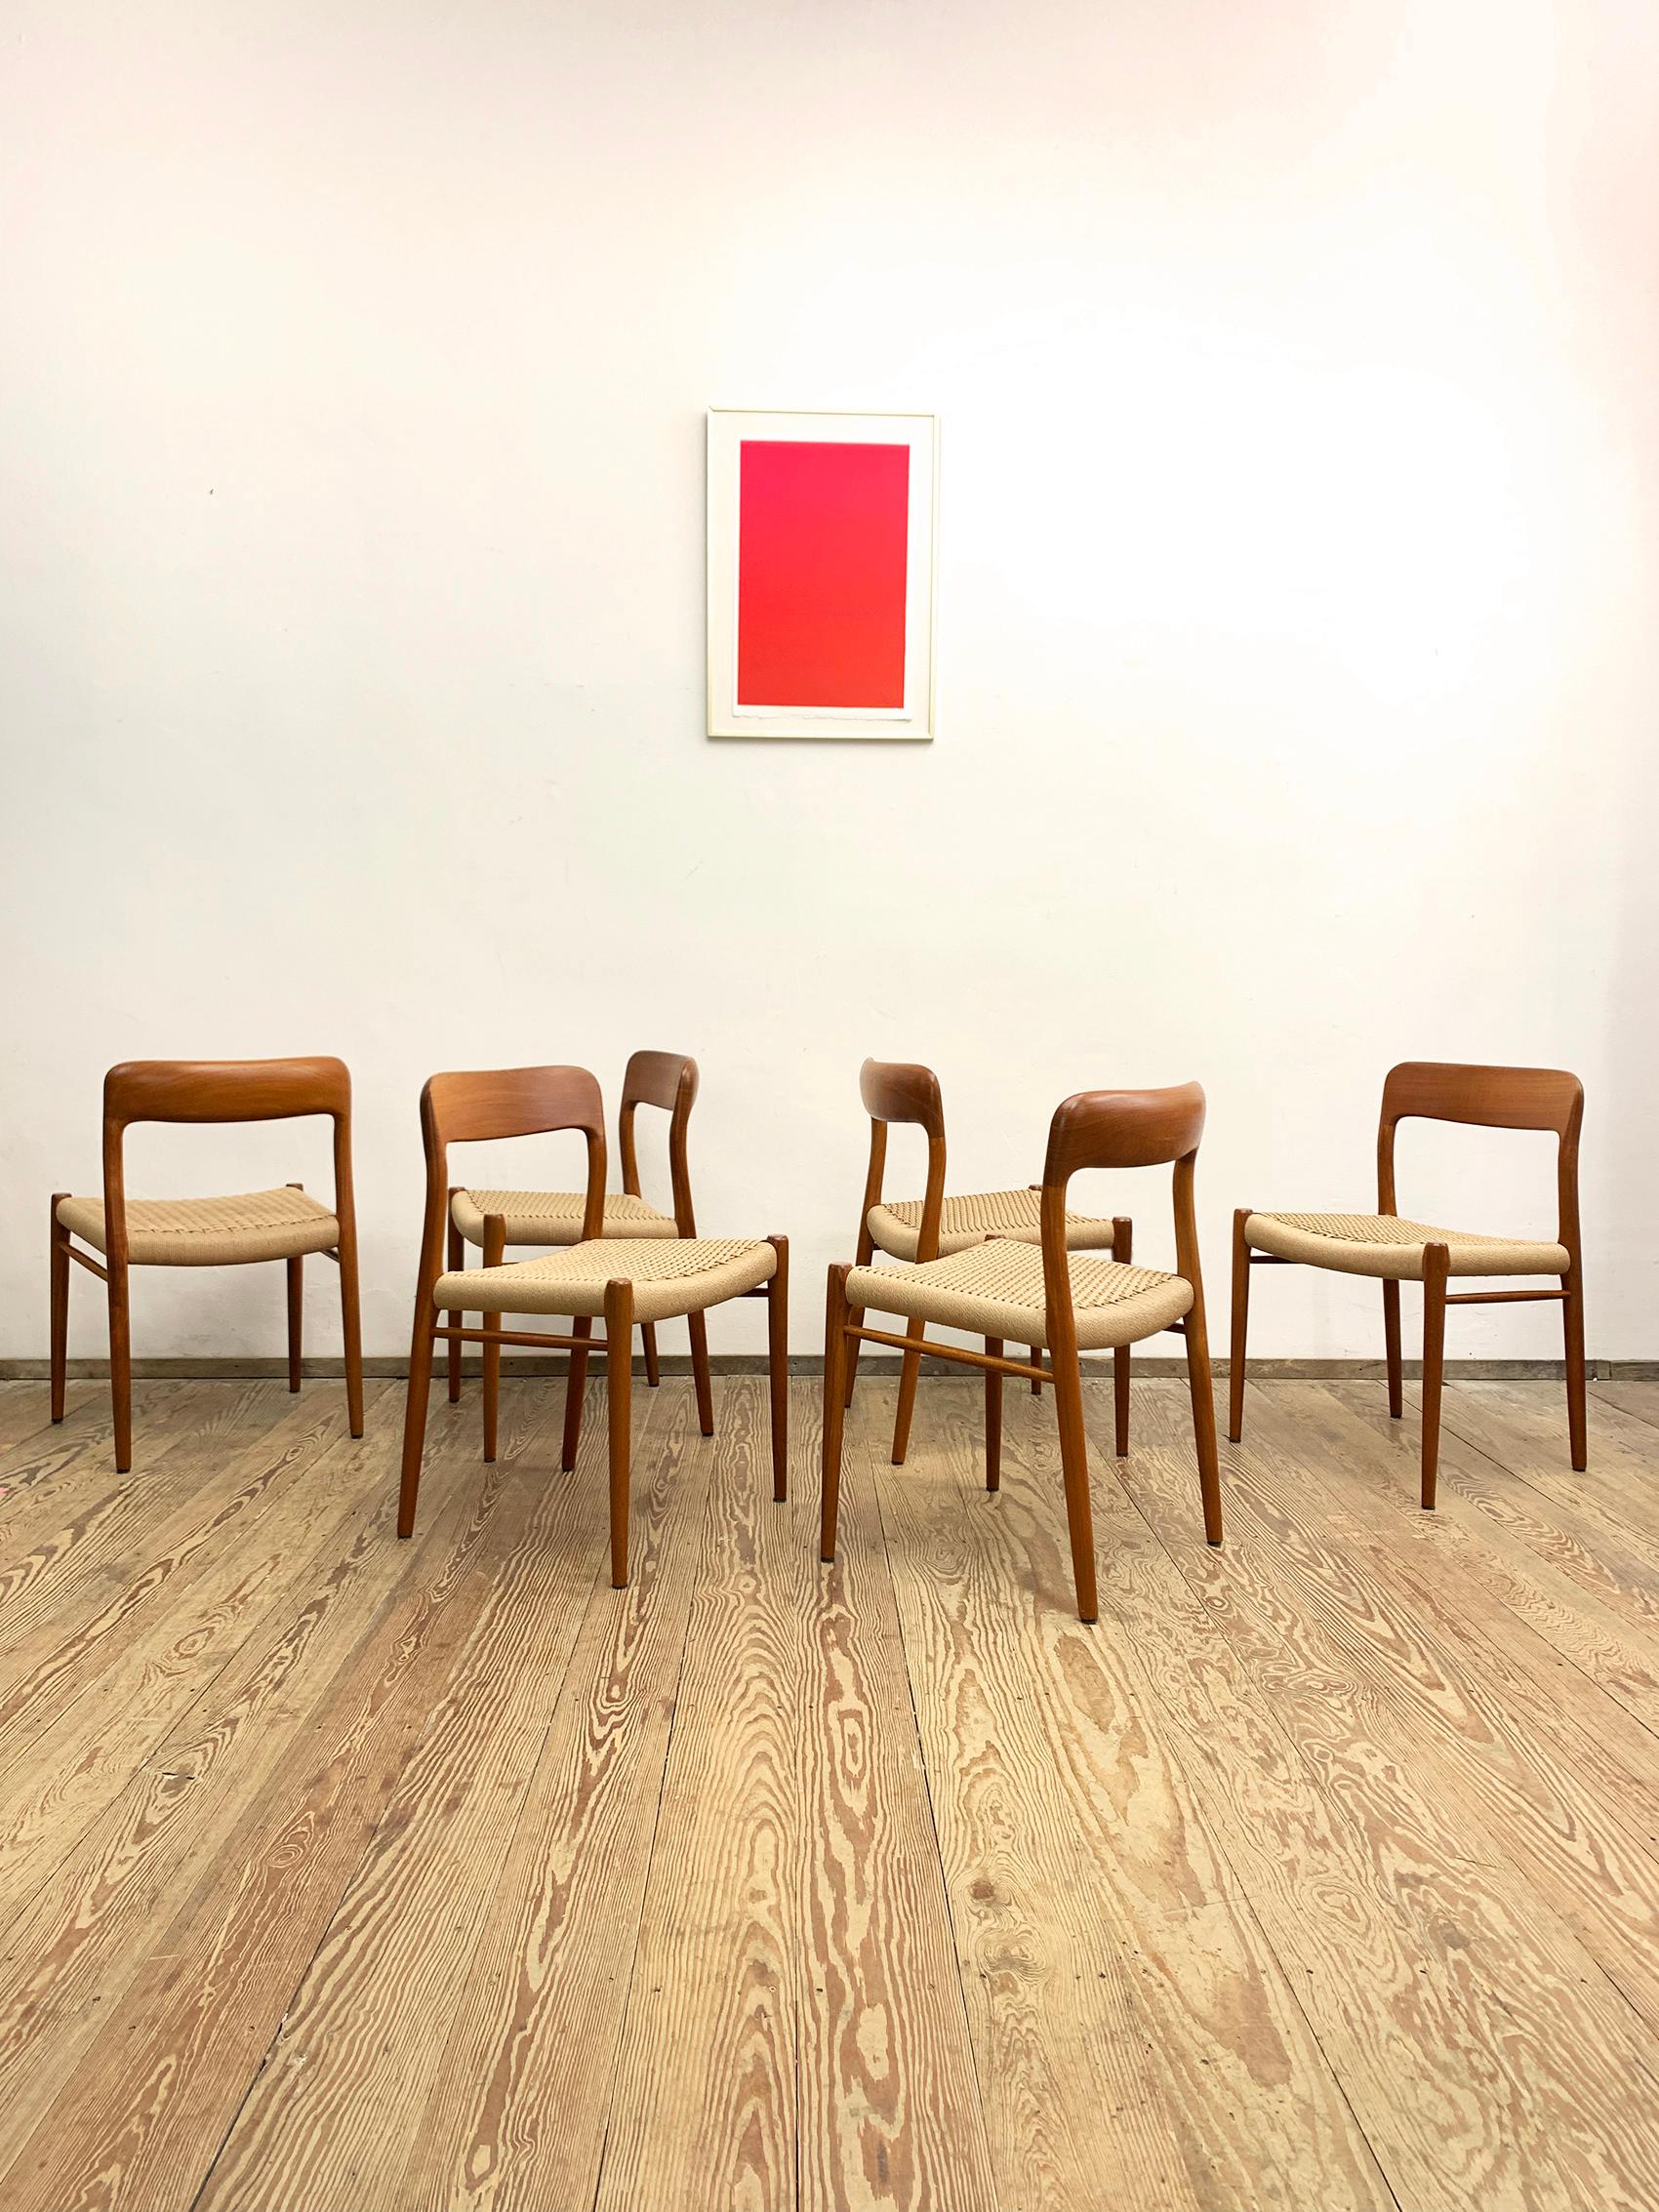 Dimensions: Height: 29.53 in. (75 cm), Width: 19.69 in. (50 cm), Depth: 18.51 in. (47 cm)

This beautiful set of danish dining chairs designed by Niels O. Møller in the 1950s was manufactured by J.L. Møllers in Denmark. The set features 6 chairs of